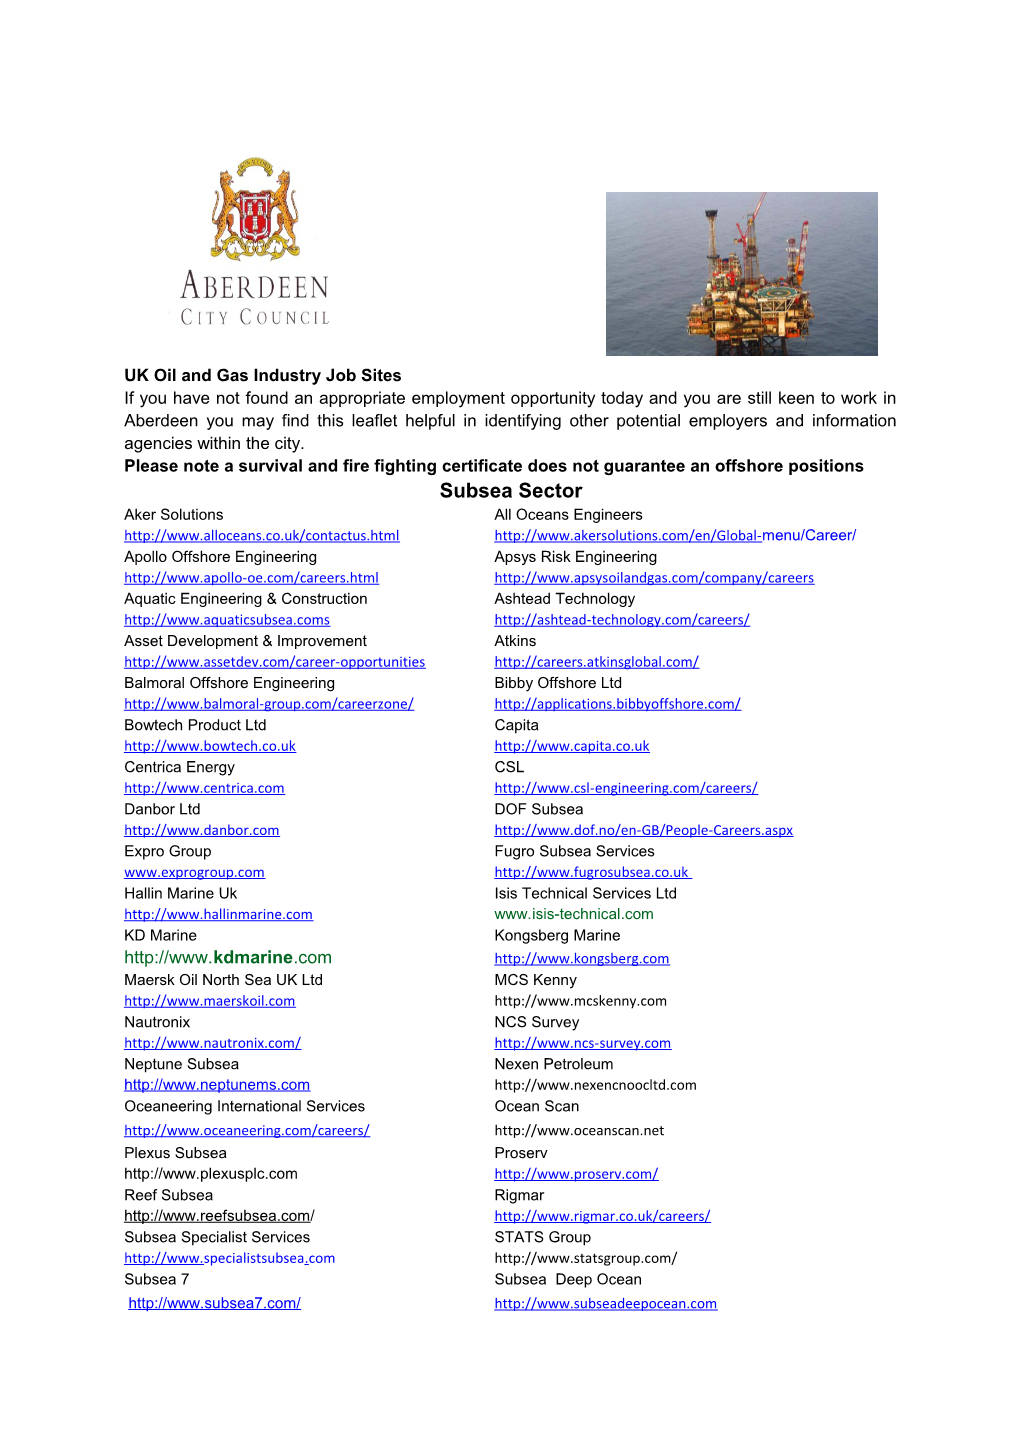 UK Oil and Gas Industry Job Sites